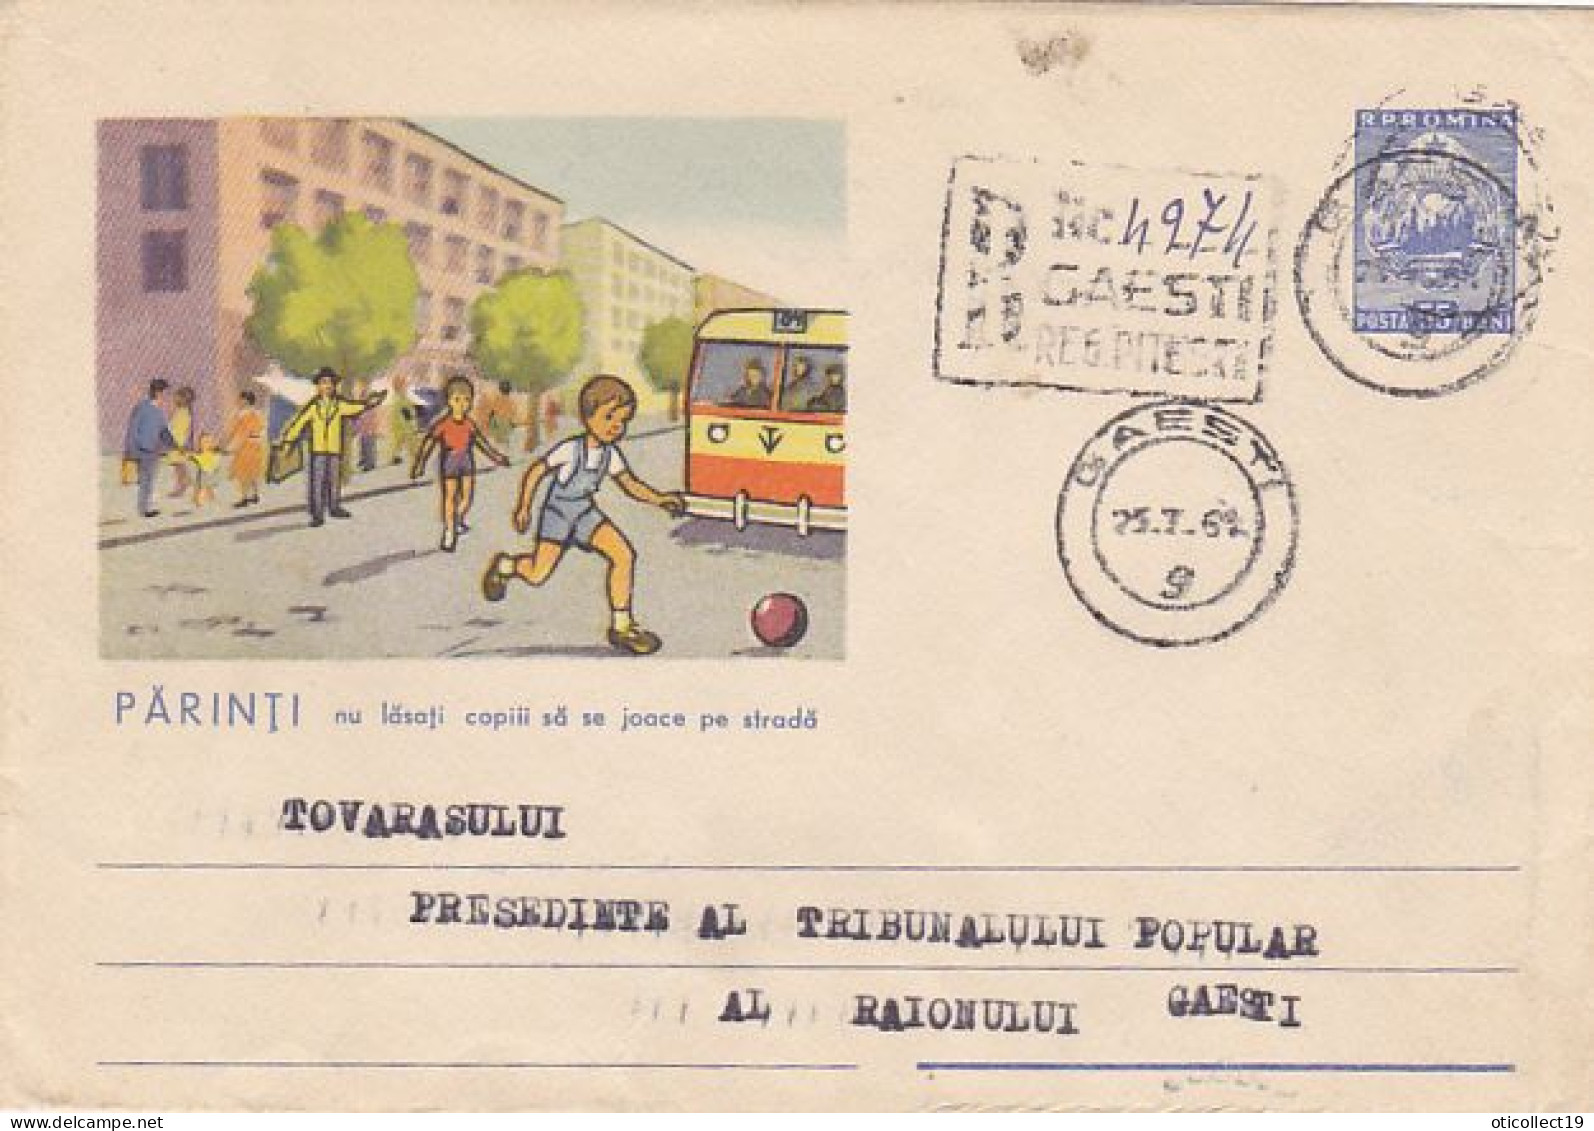 HEALTH, ROAD SAFETY, CHILDRENS PLAYING ON THE STREET, REGISTERED COVER STATIONERY, 1961, ROMANIA - Unfälle Und Verkehrssicherheit